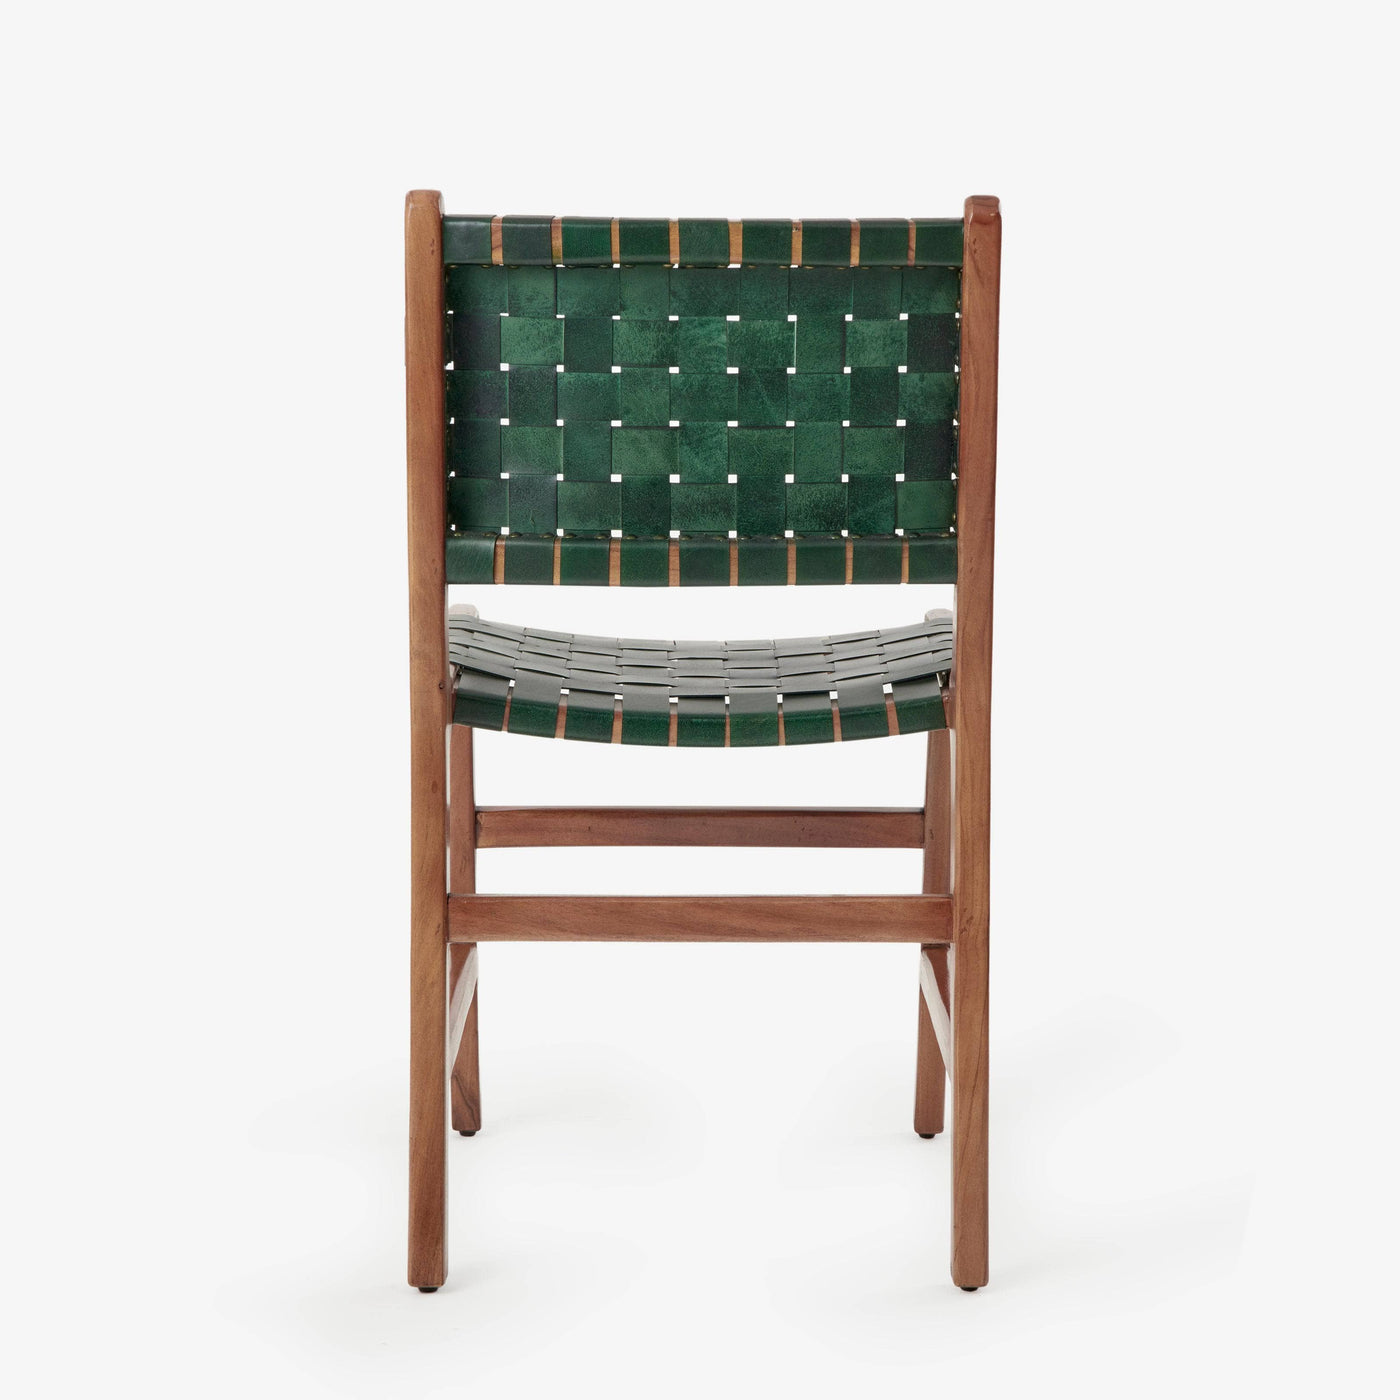 Pomero Woven Leather Dining Chair, Green Dining Chairs & Benches sazy.com